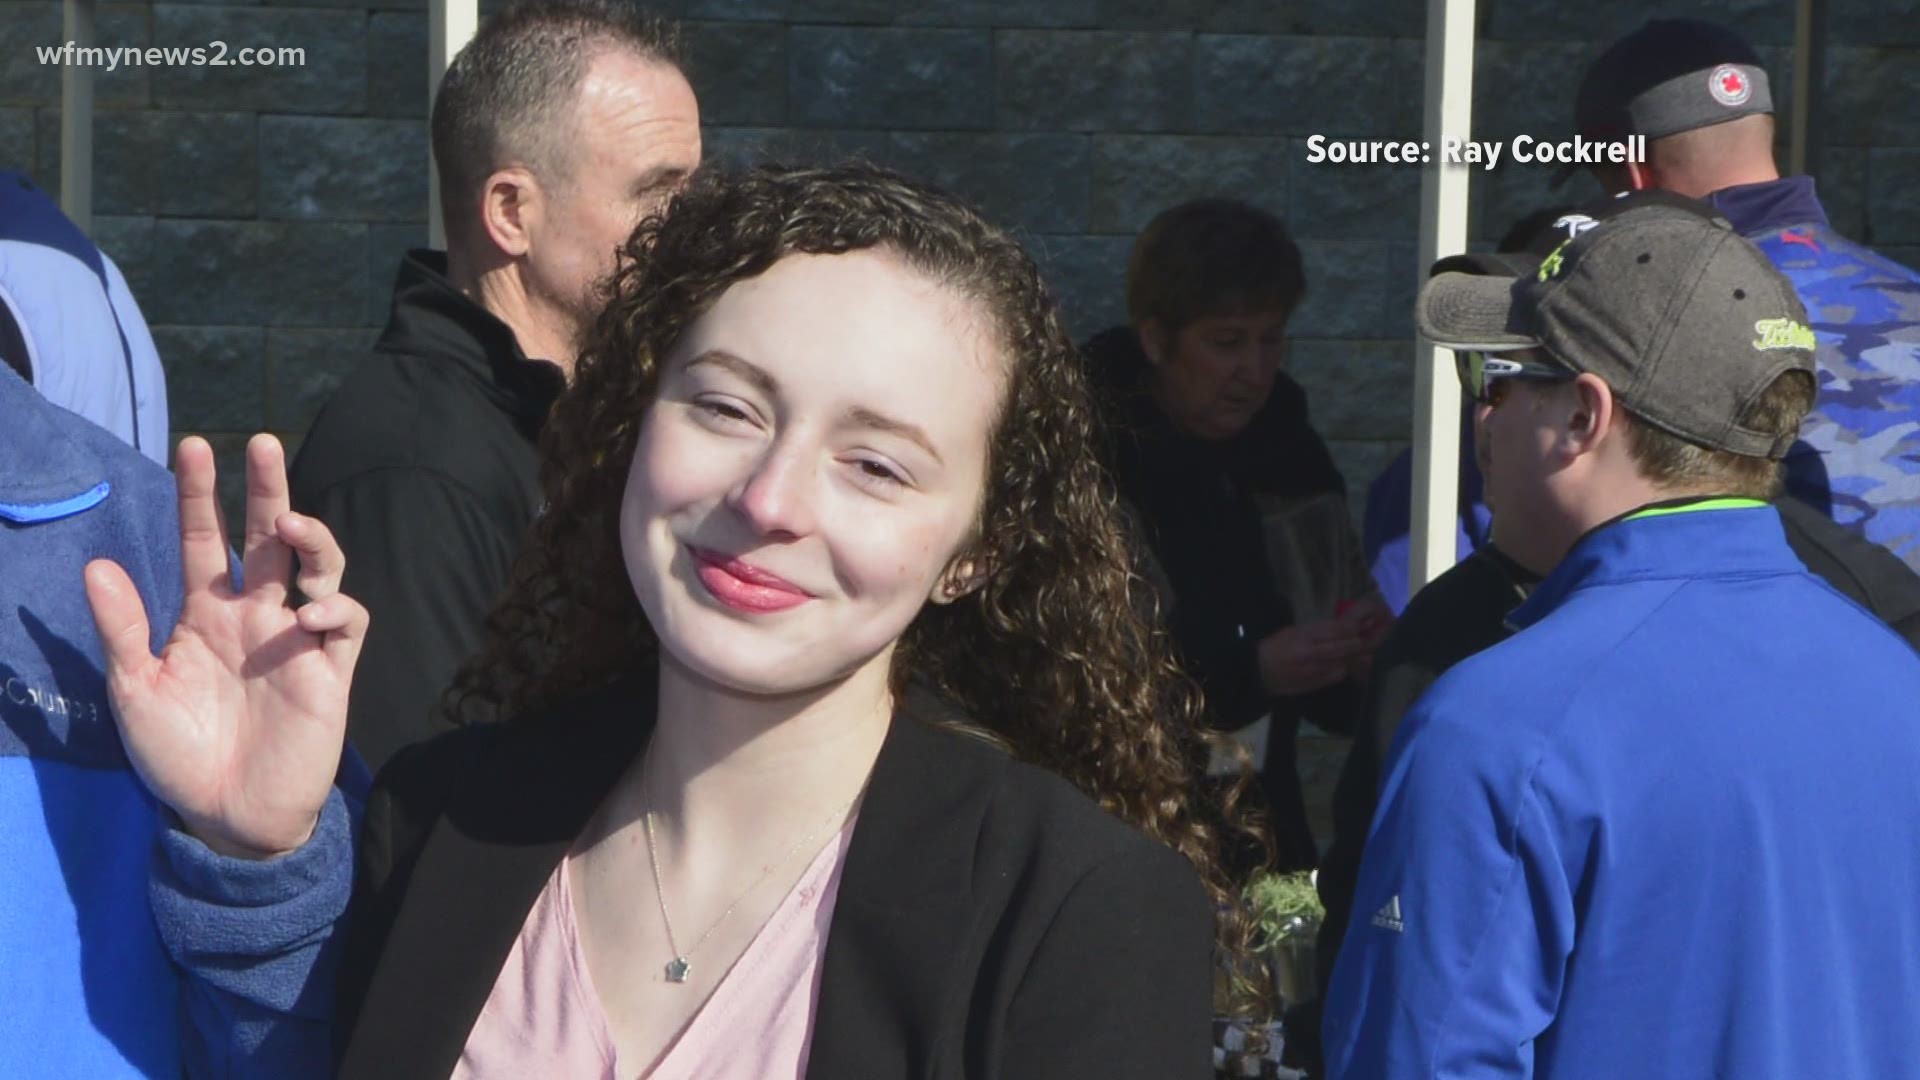 Gianna was found Monday in Tennessee after investigators say they believe her boyfriend killed her.